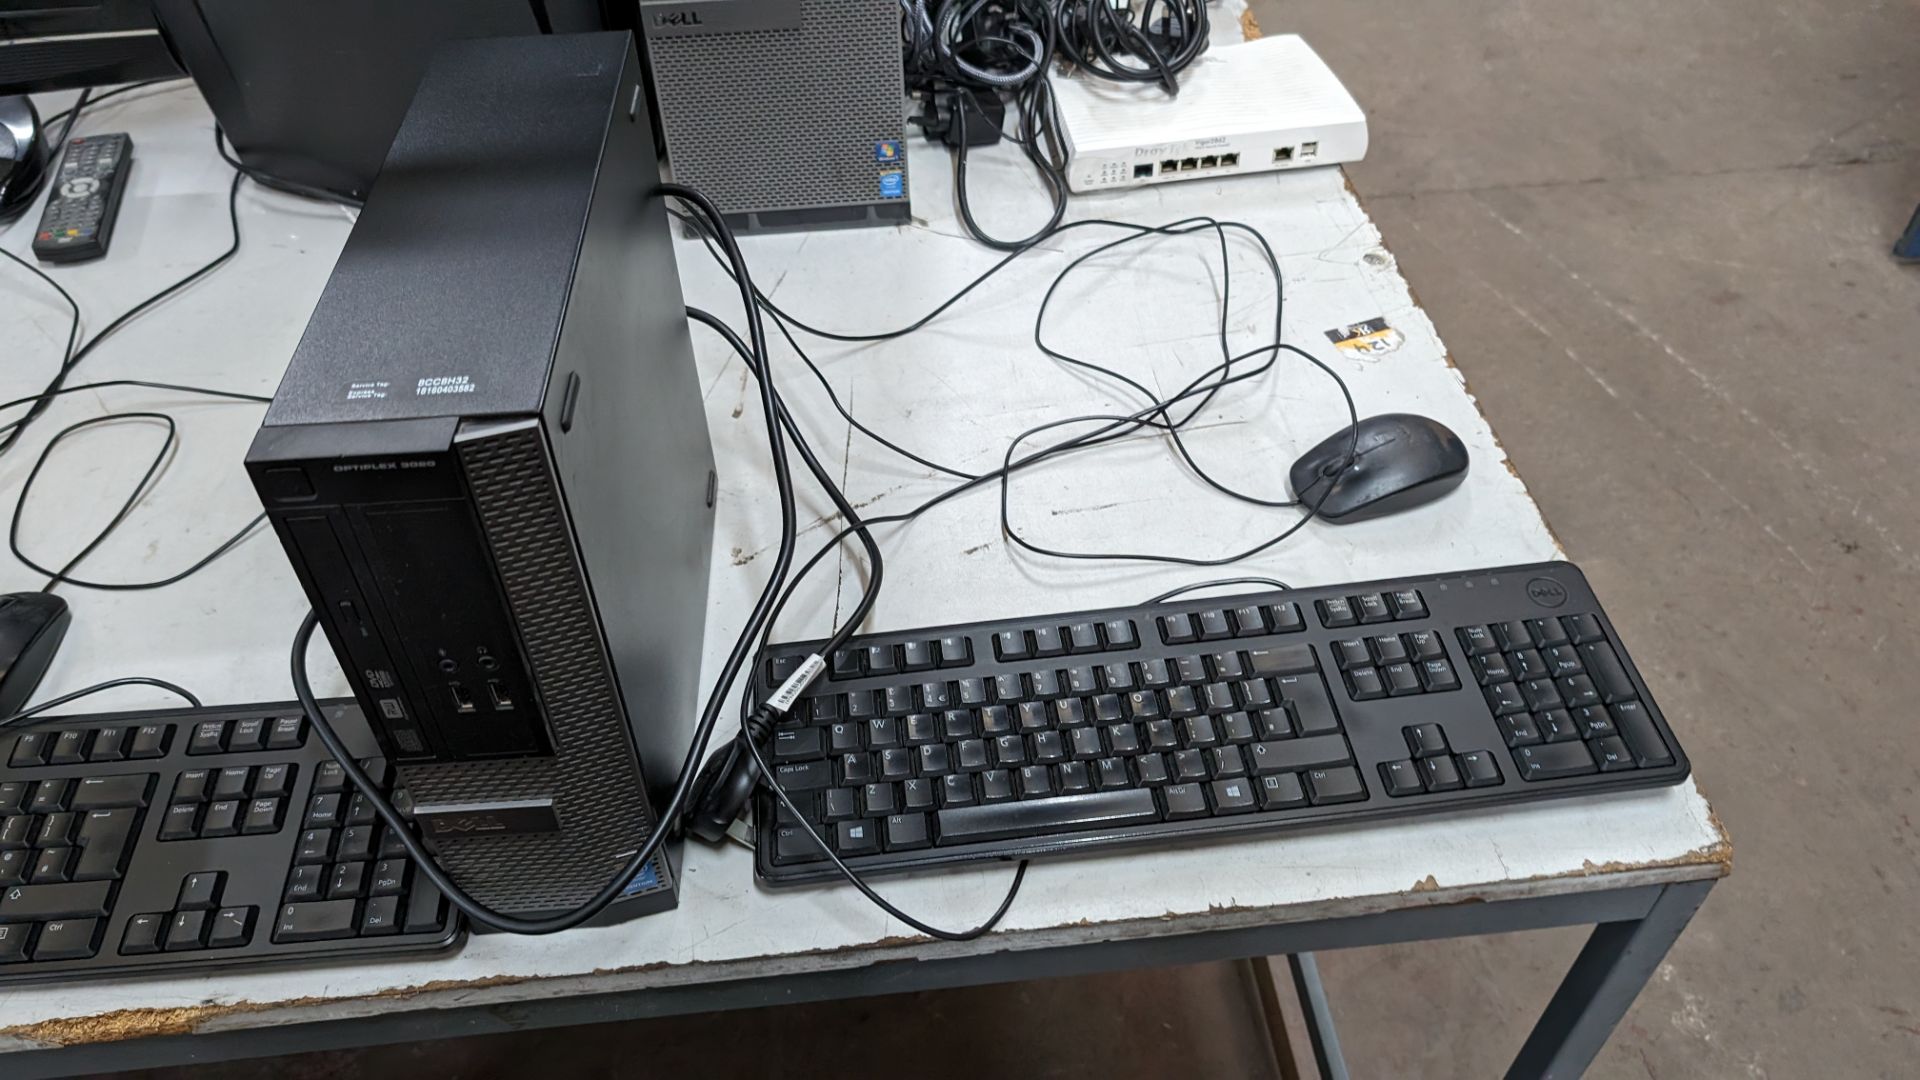 3 off desktop computers each including keyboard and mouse - Image 8 of 10